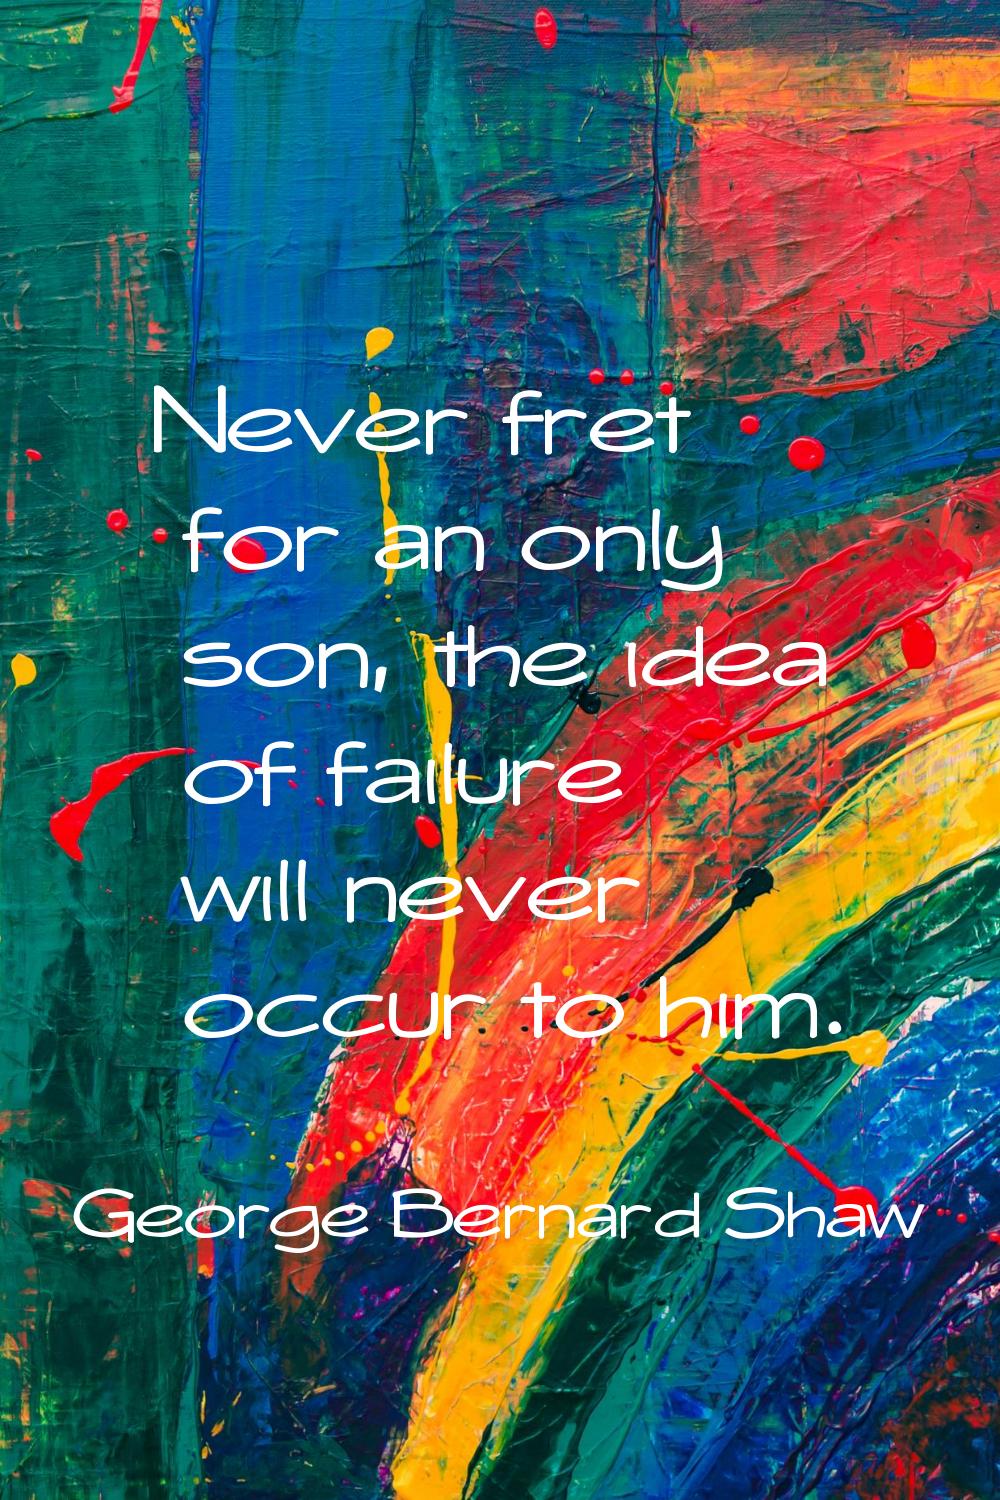 Never fret for an only son, the idea of failure will never occur to him.